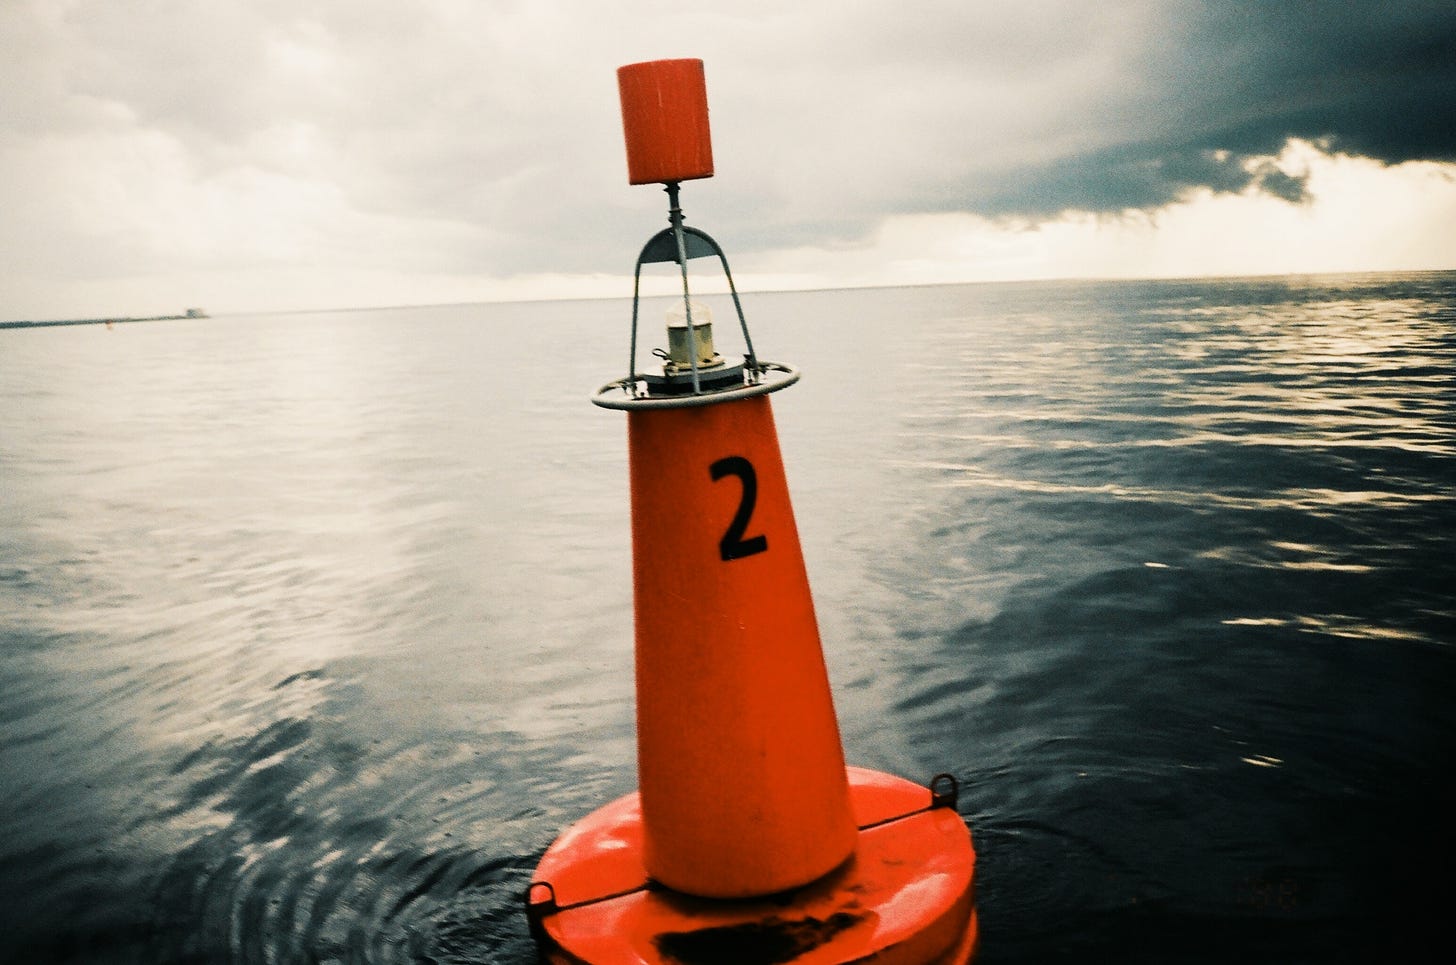 An orange marine buoy floats in a large body of water on a cloudy day